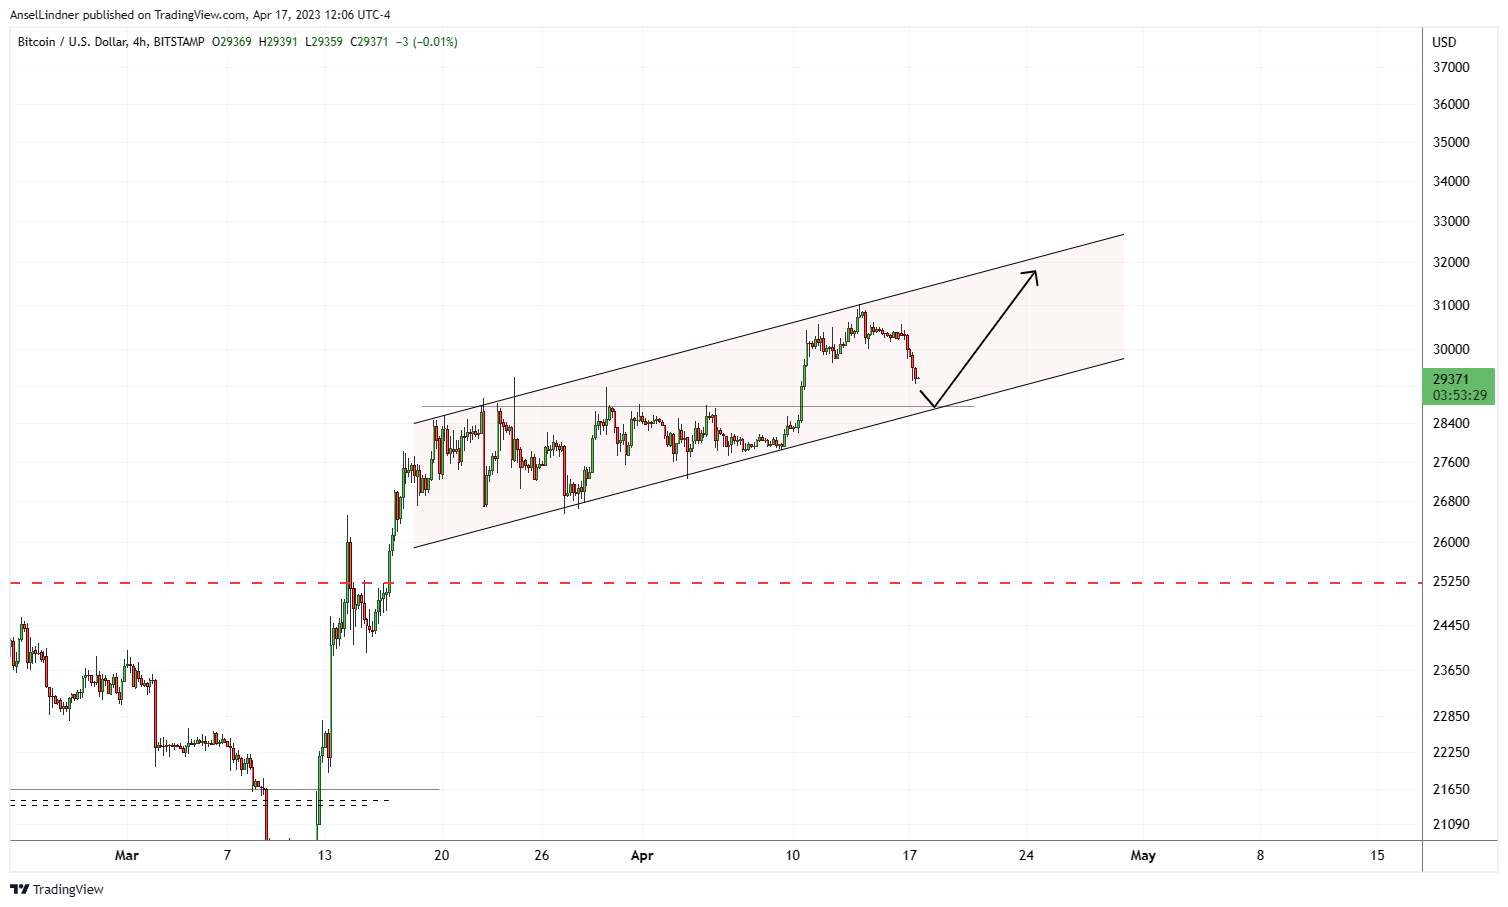 Bitcoin 4-hour chart with parallel channel